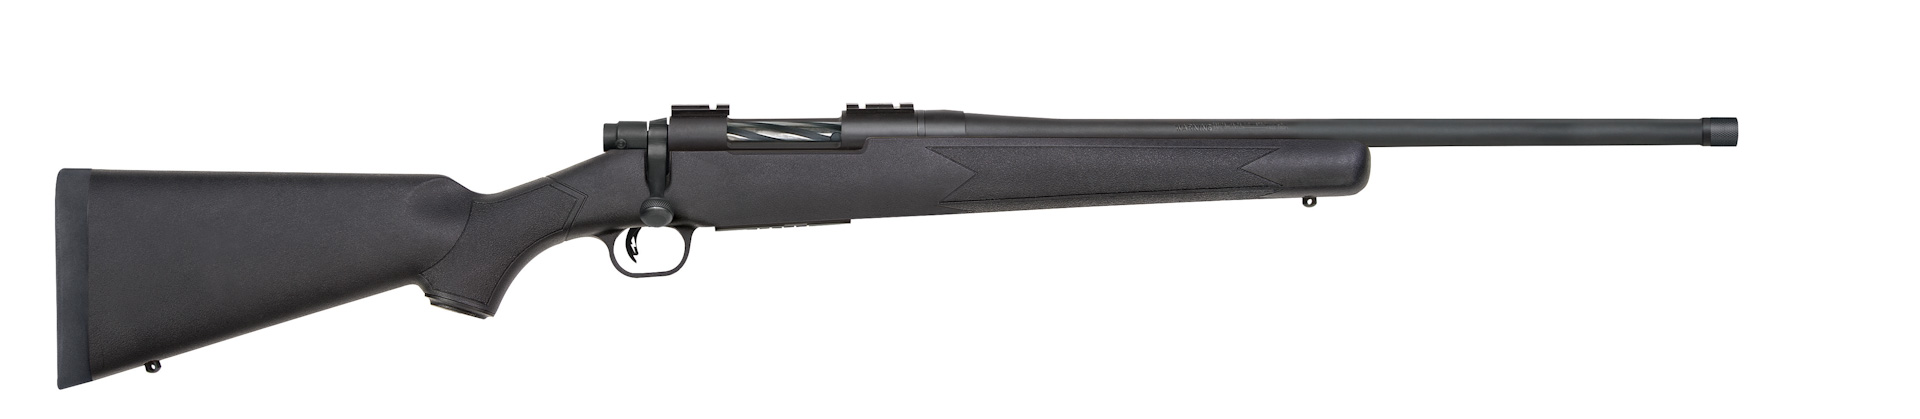 Mossberg Patriot Bolt-Action Rifles Now Available in 400 Legend 